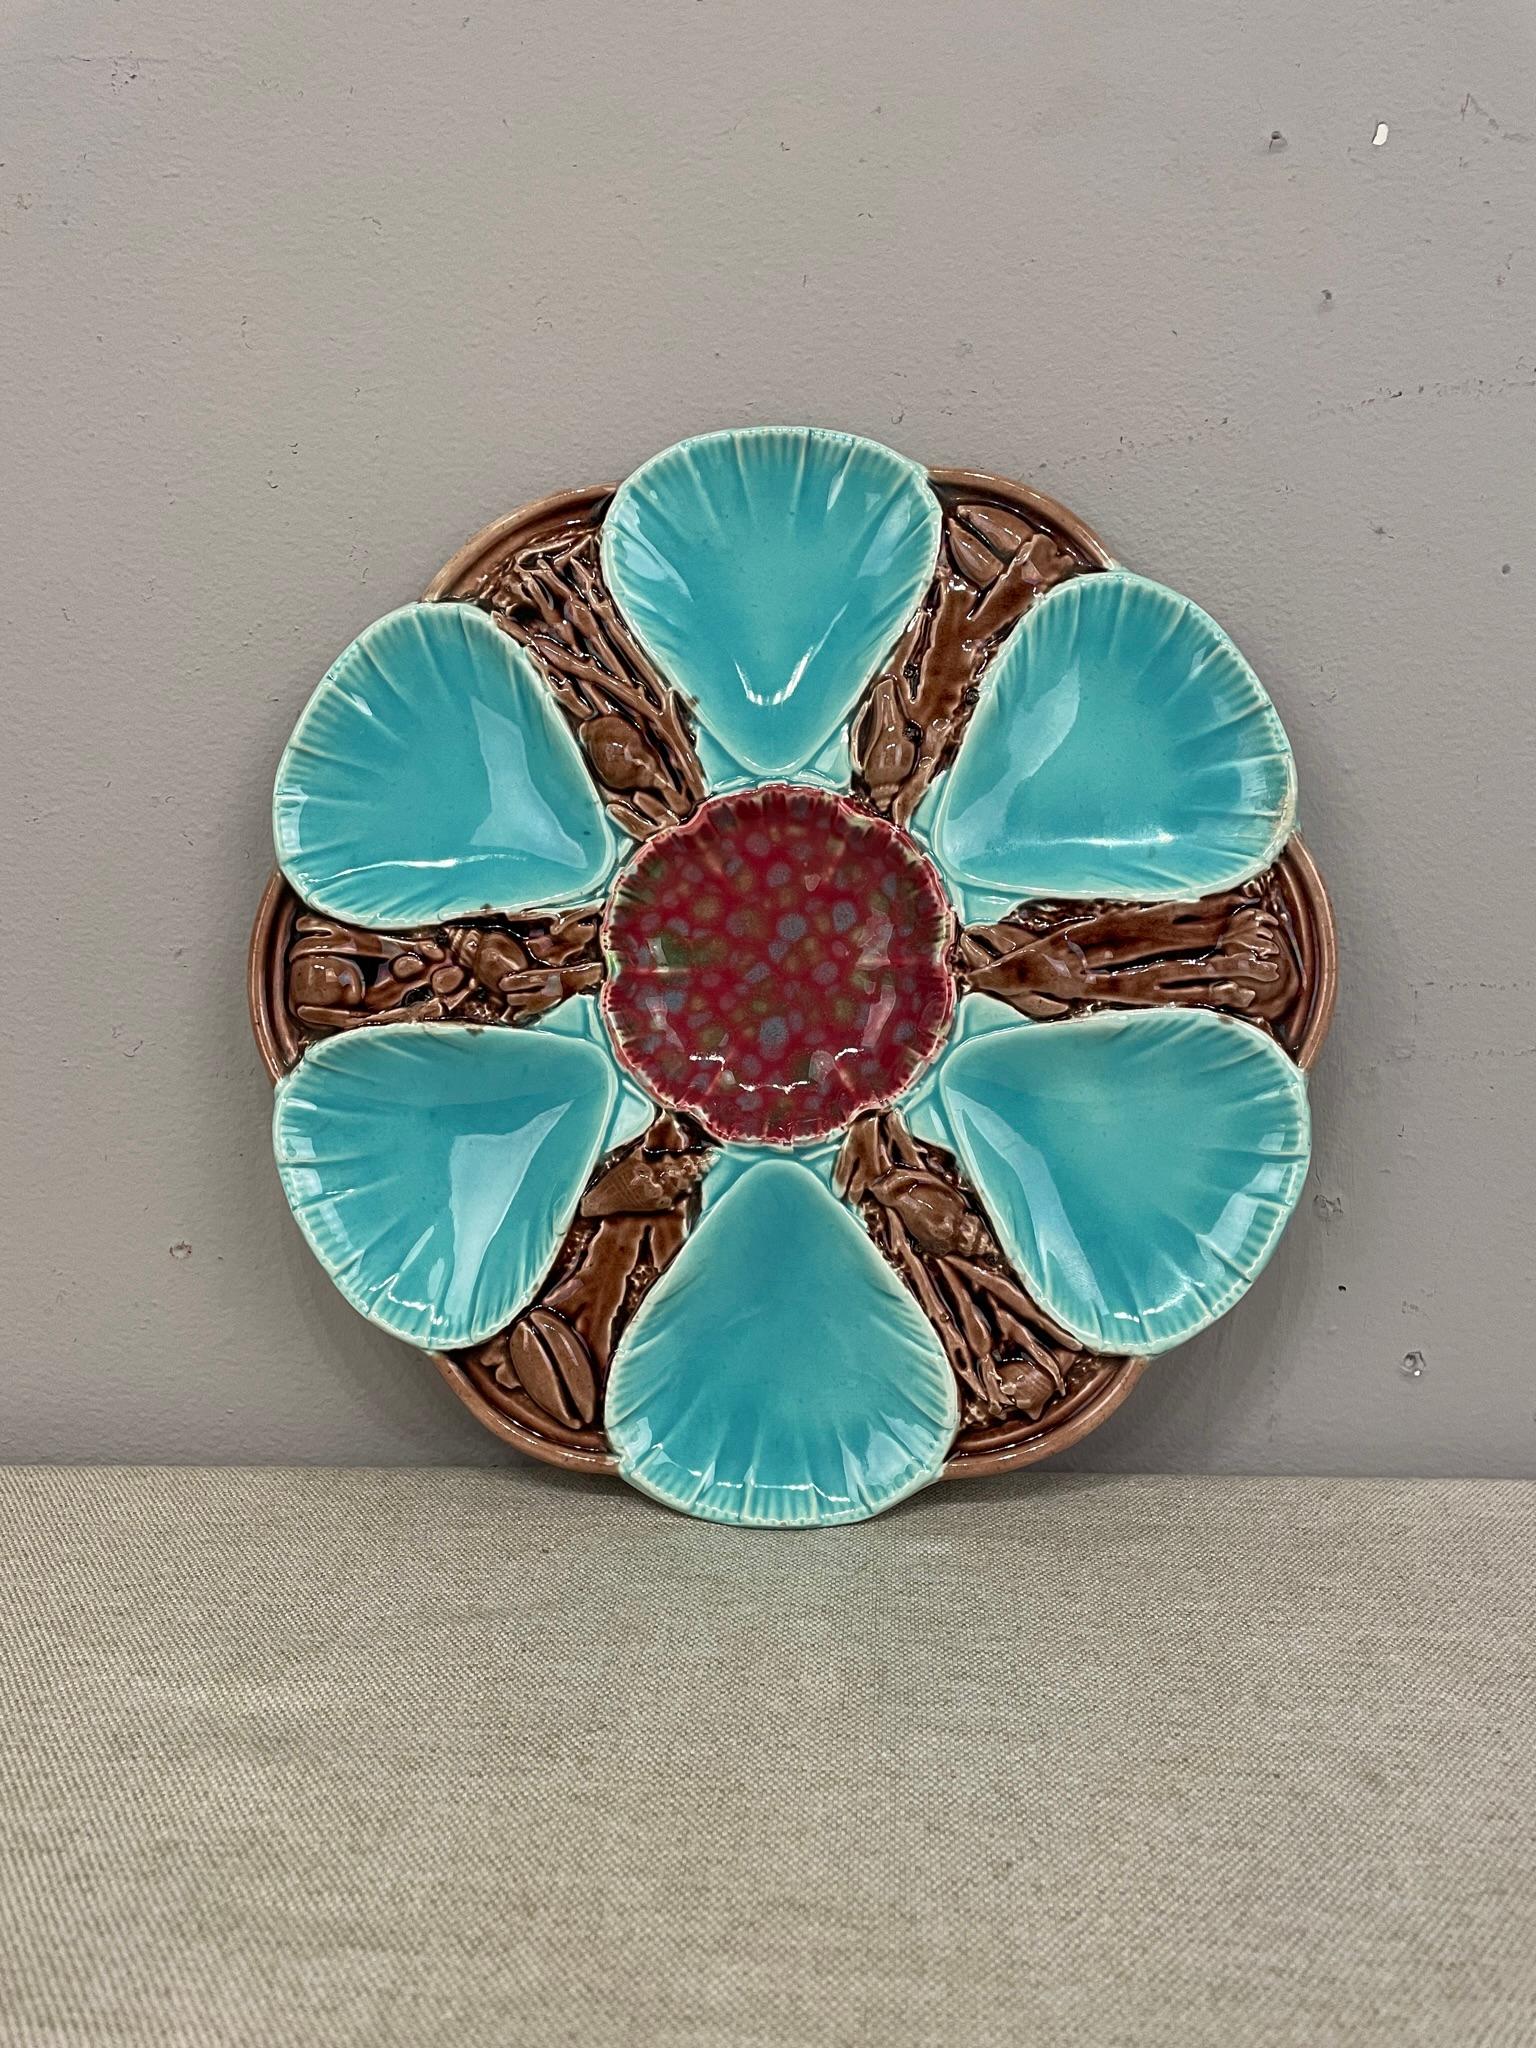 A late 19th century English Majolica 6 wells turquoise Oyster Plates with a center well. No damages noted. Dimensions are 9.75